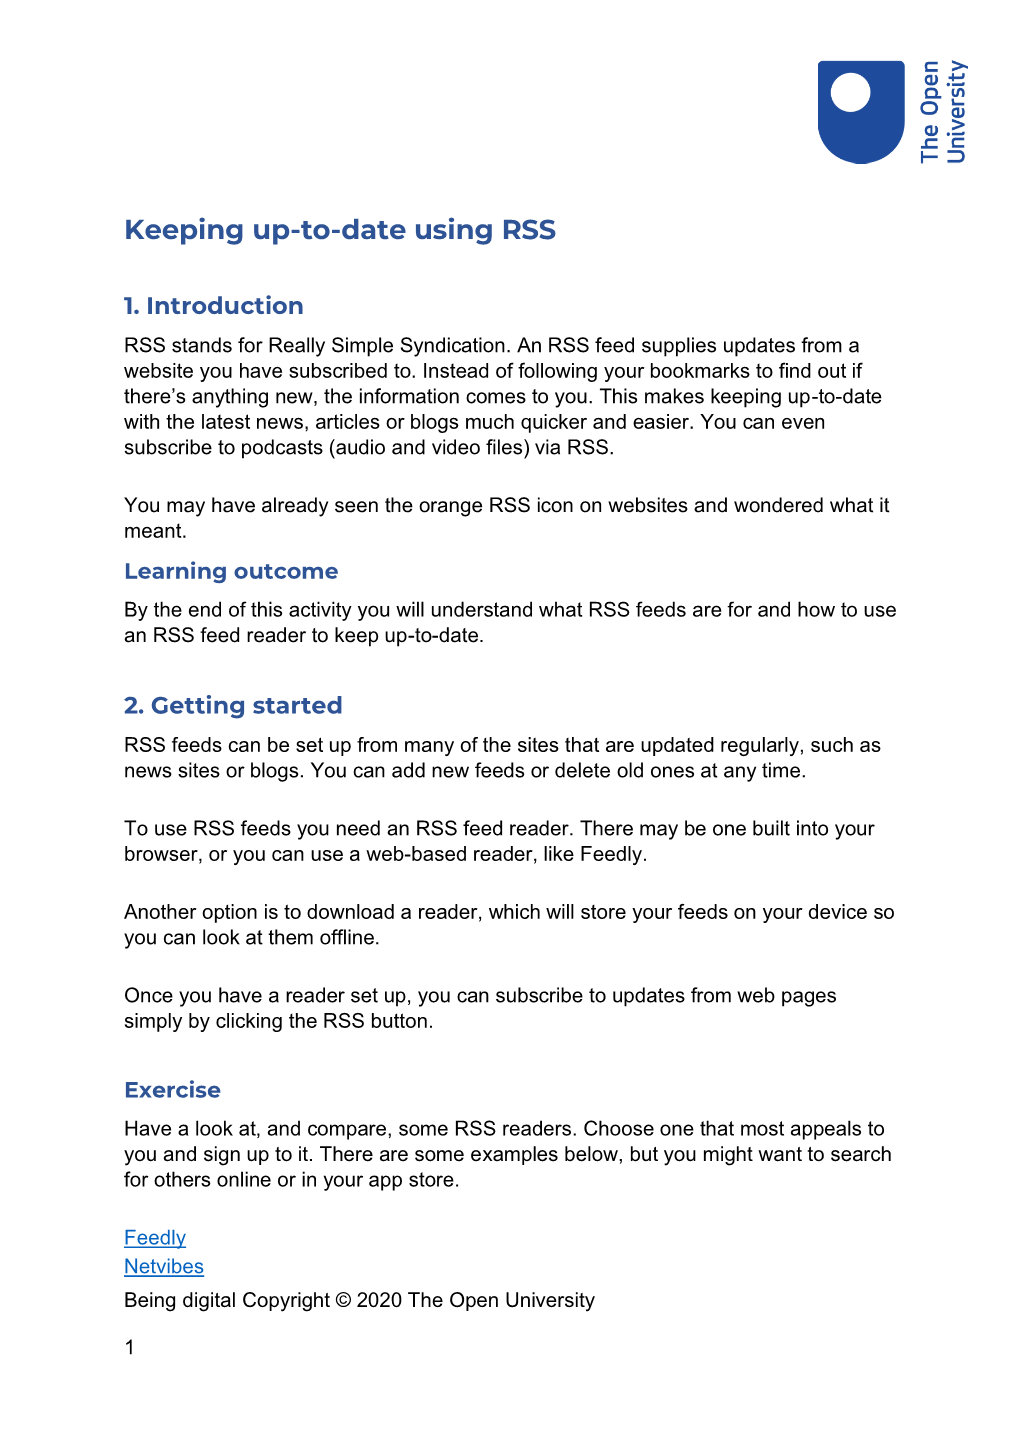 Keeping Up-To-Date Using RSS